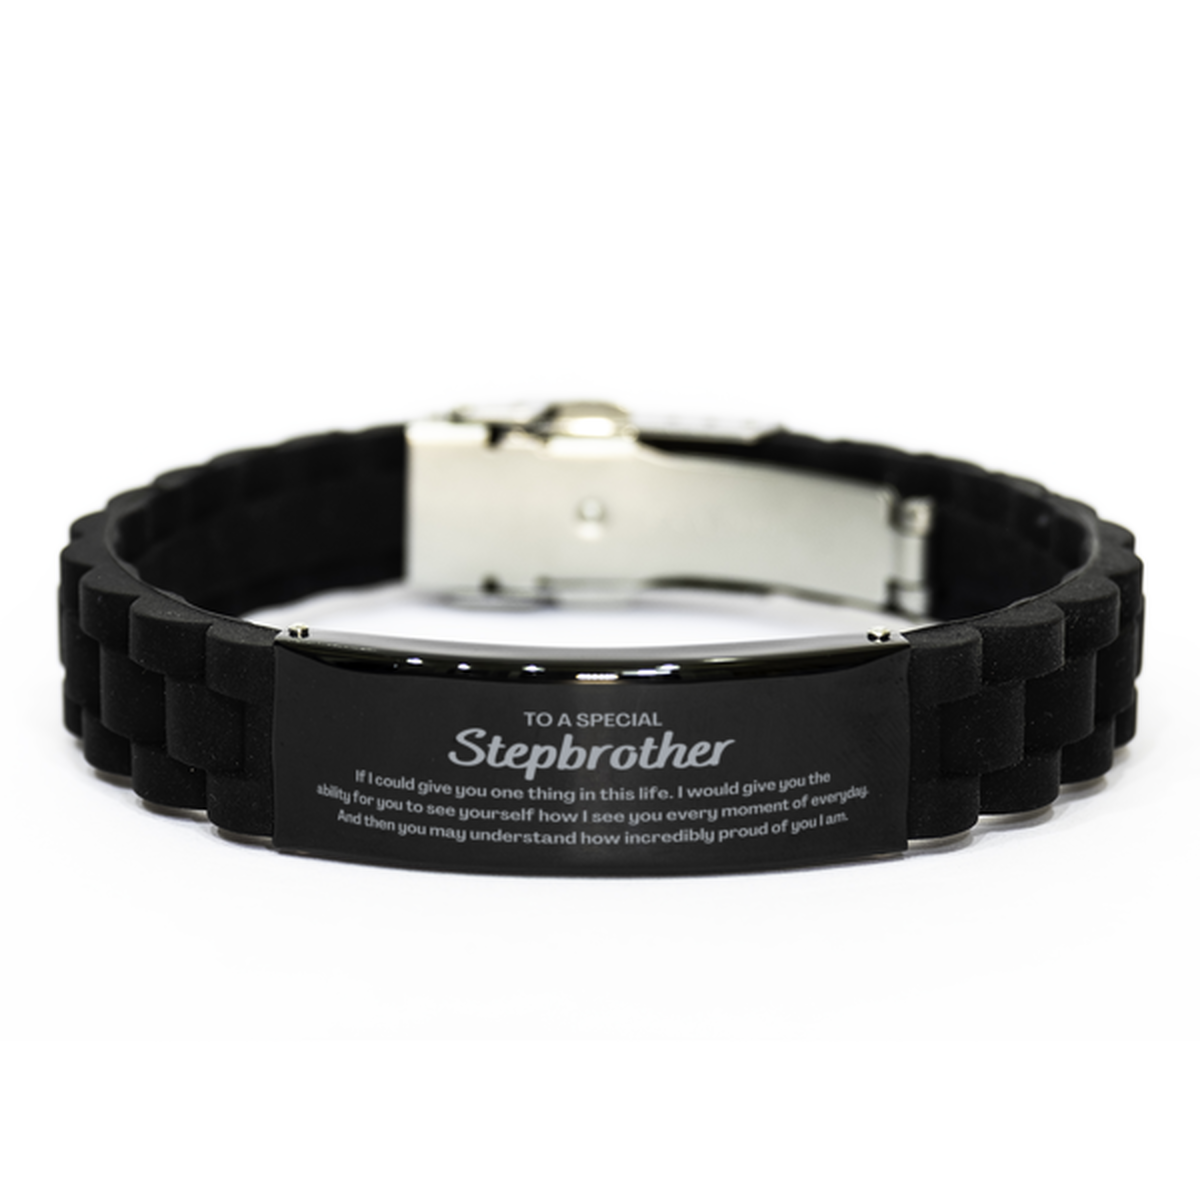 To My Stepbrother Black Glidelock Clasp Bracelet, Gifts For Stepbrother Engraved, Inspirational Gifts for Christmas Birthday, Epic Gifts for Stepbrother To A Special Stepbrother how incredibly proud of you I am